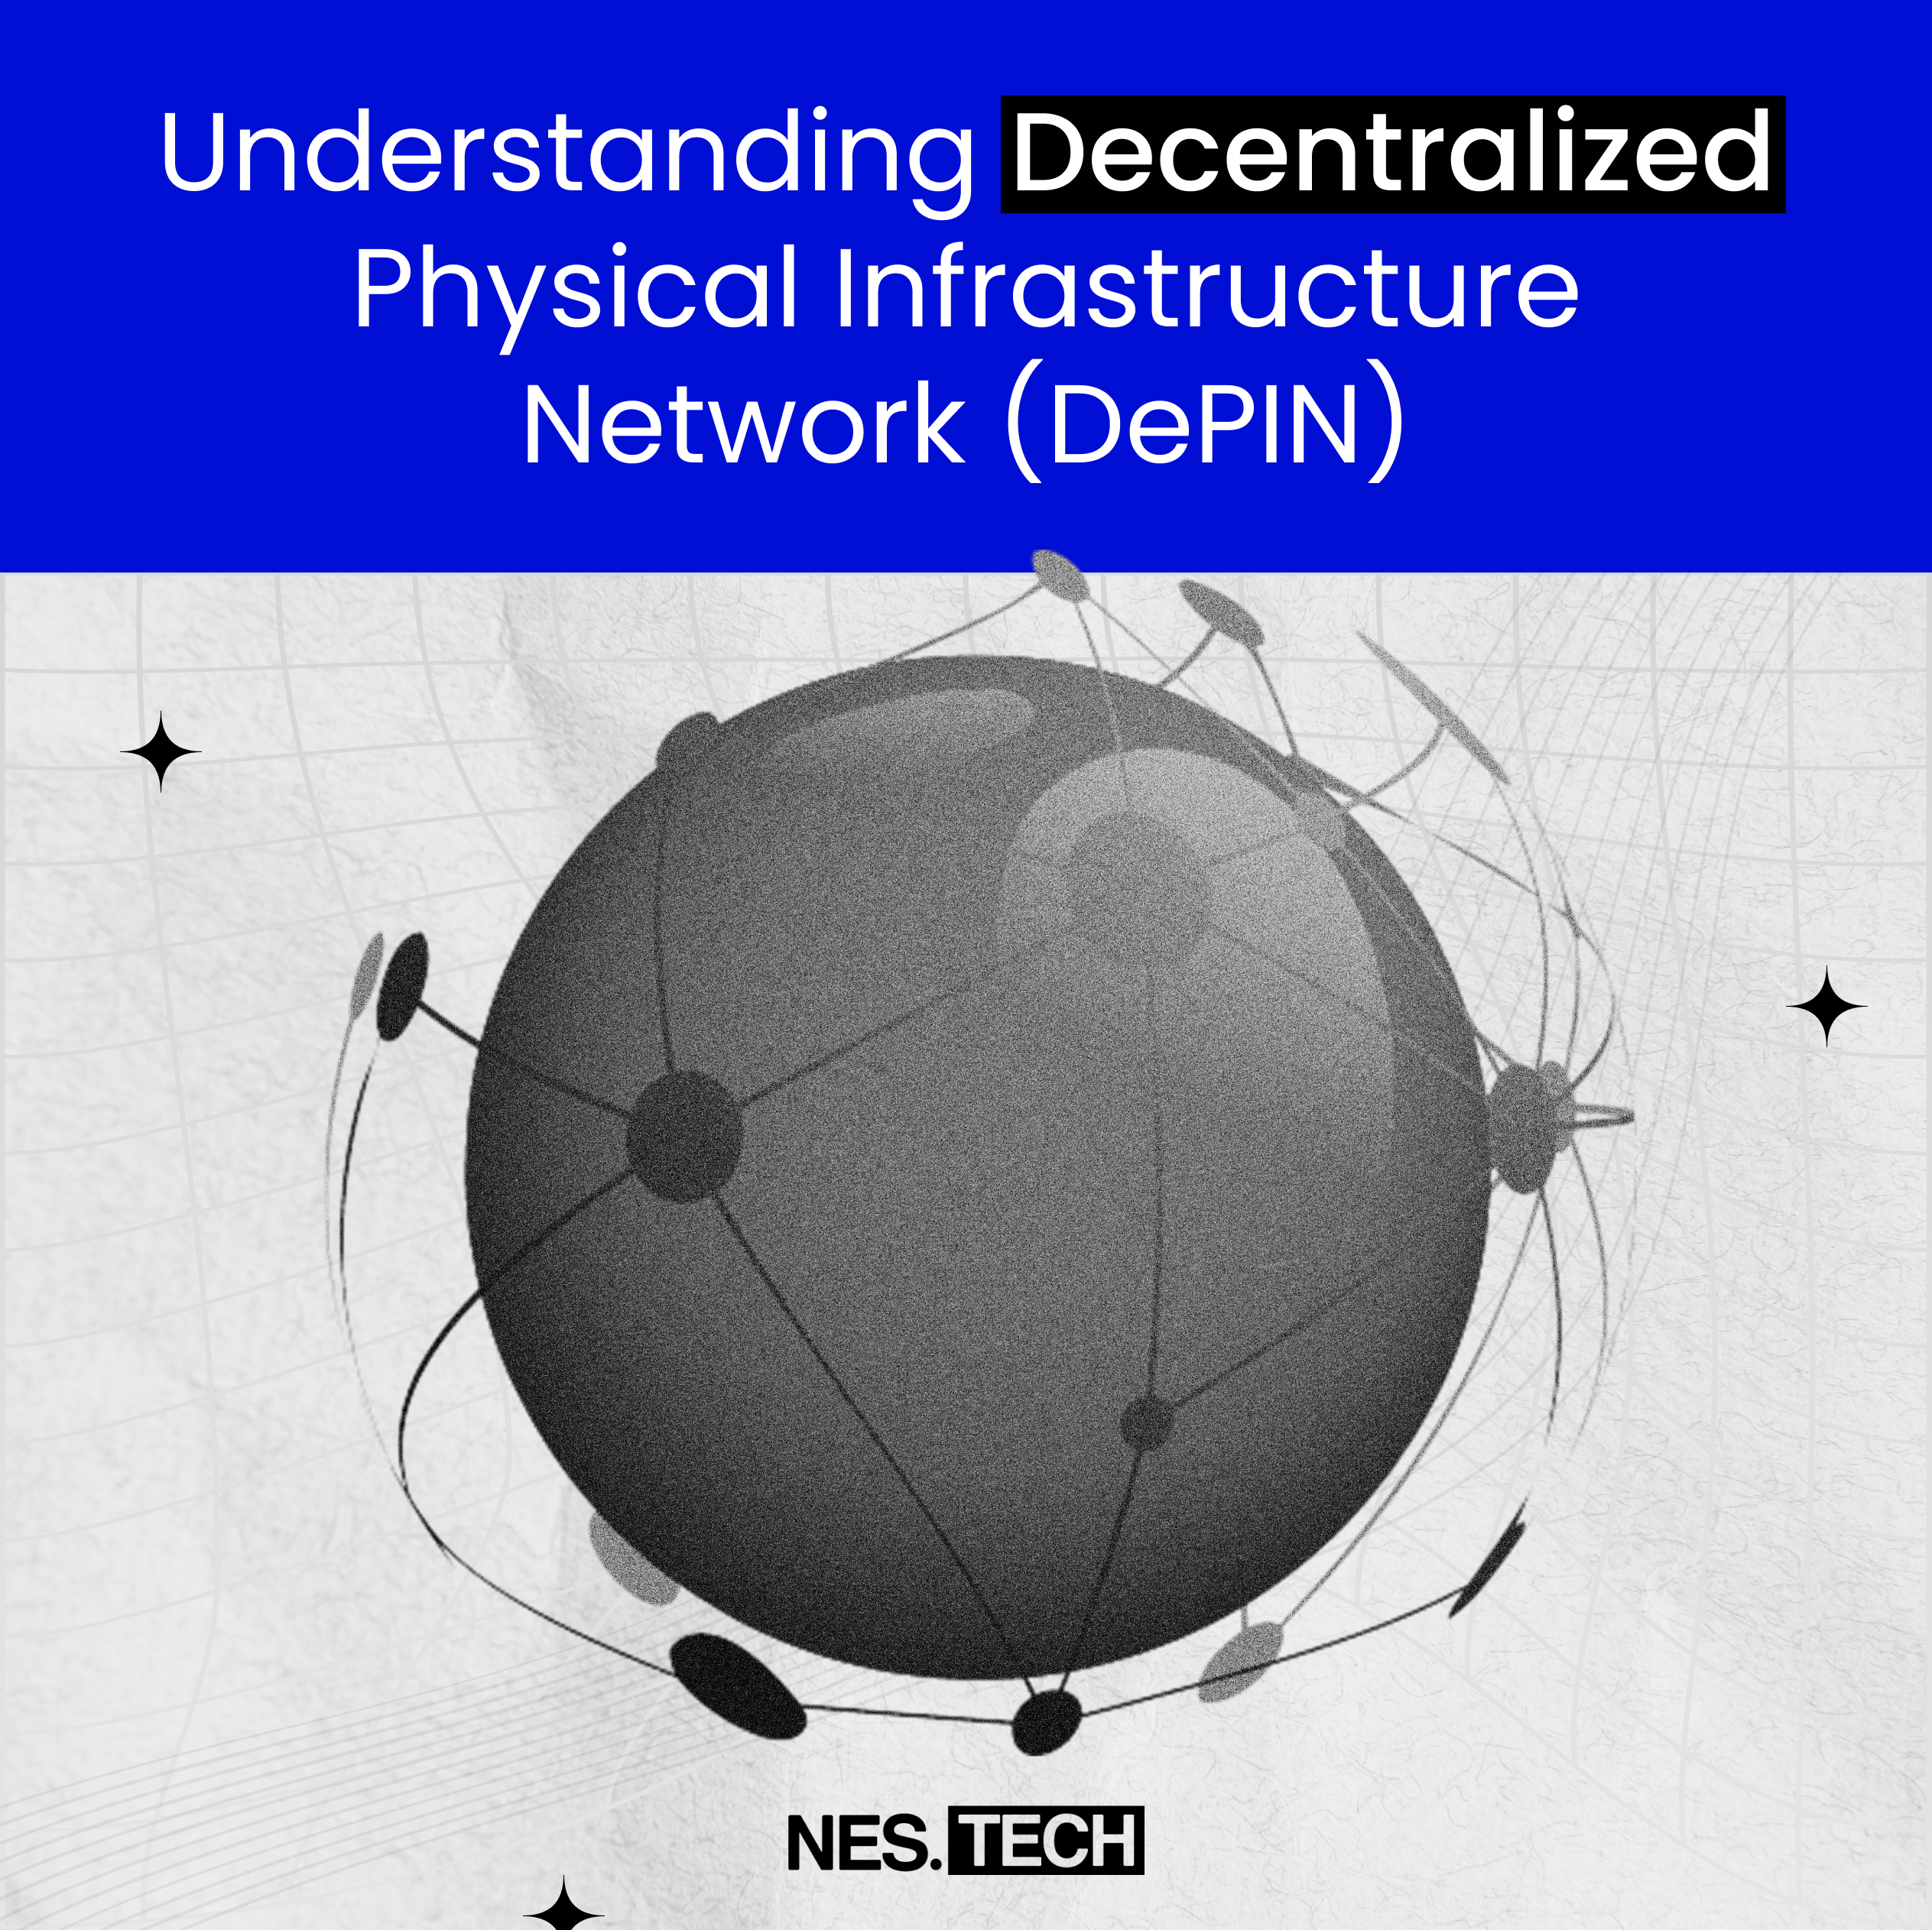 The Future Of Decentralized Physical Infrastructure Network (DePIN)